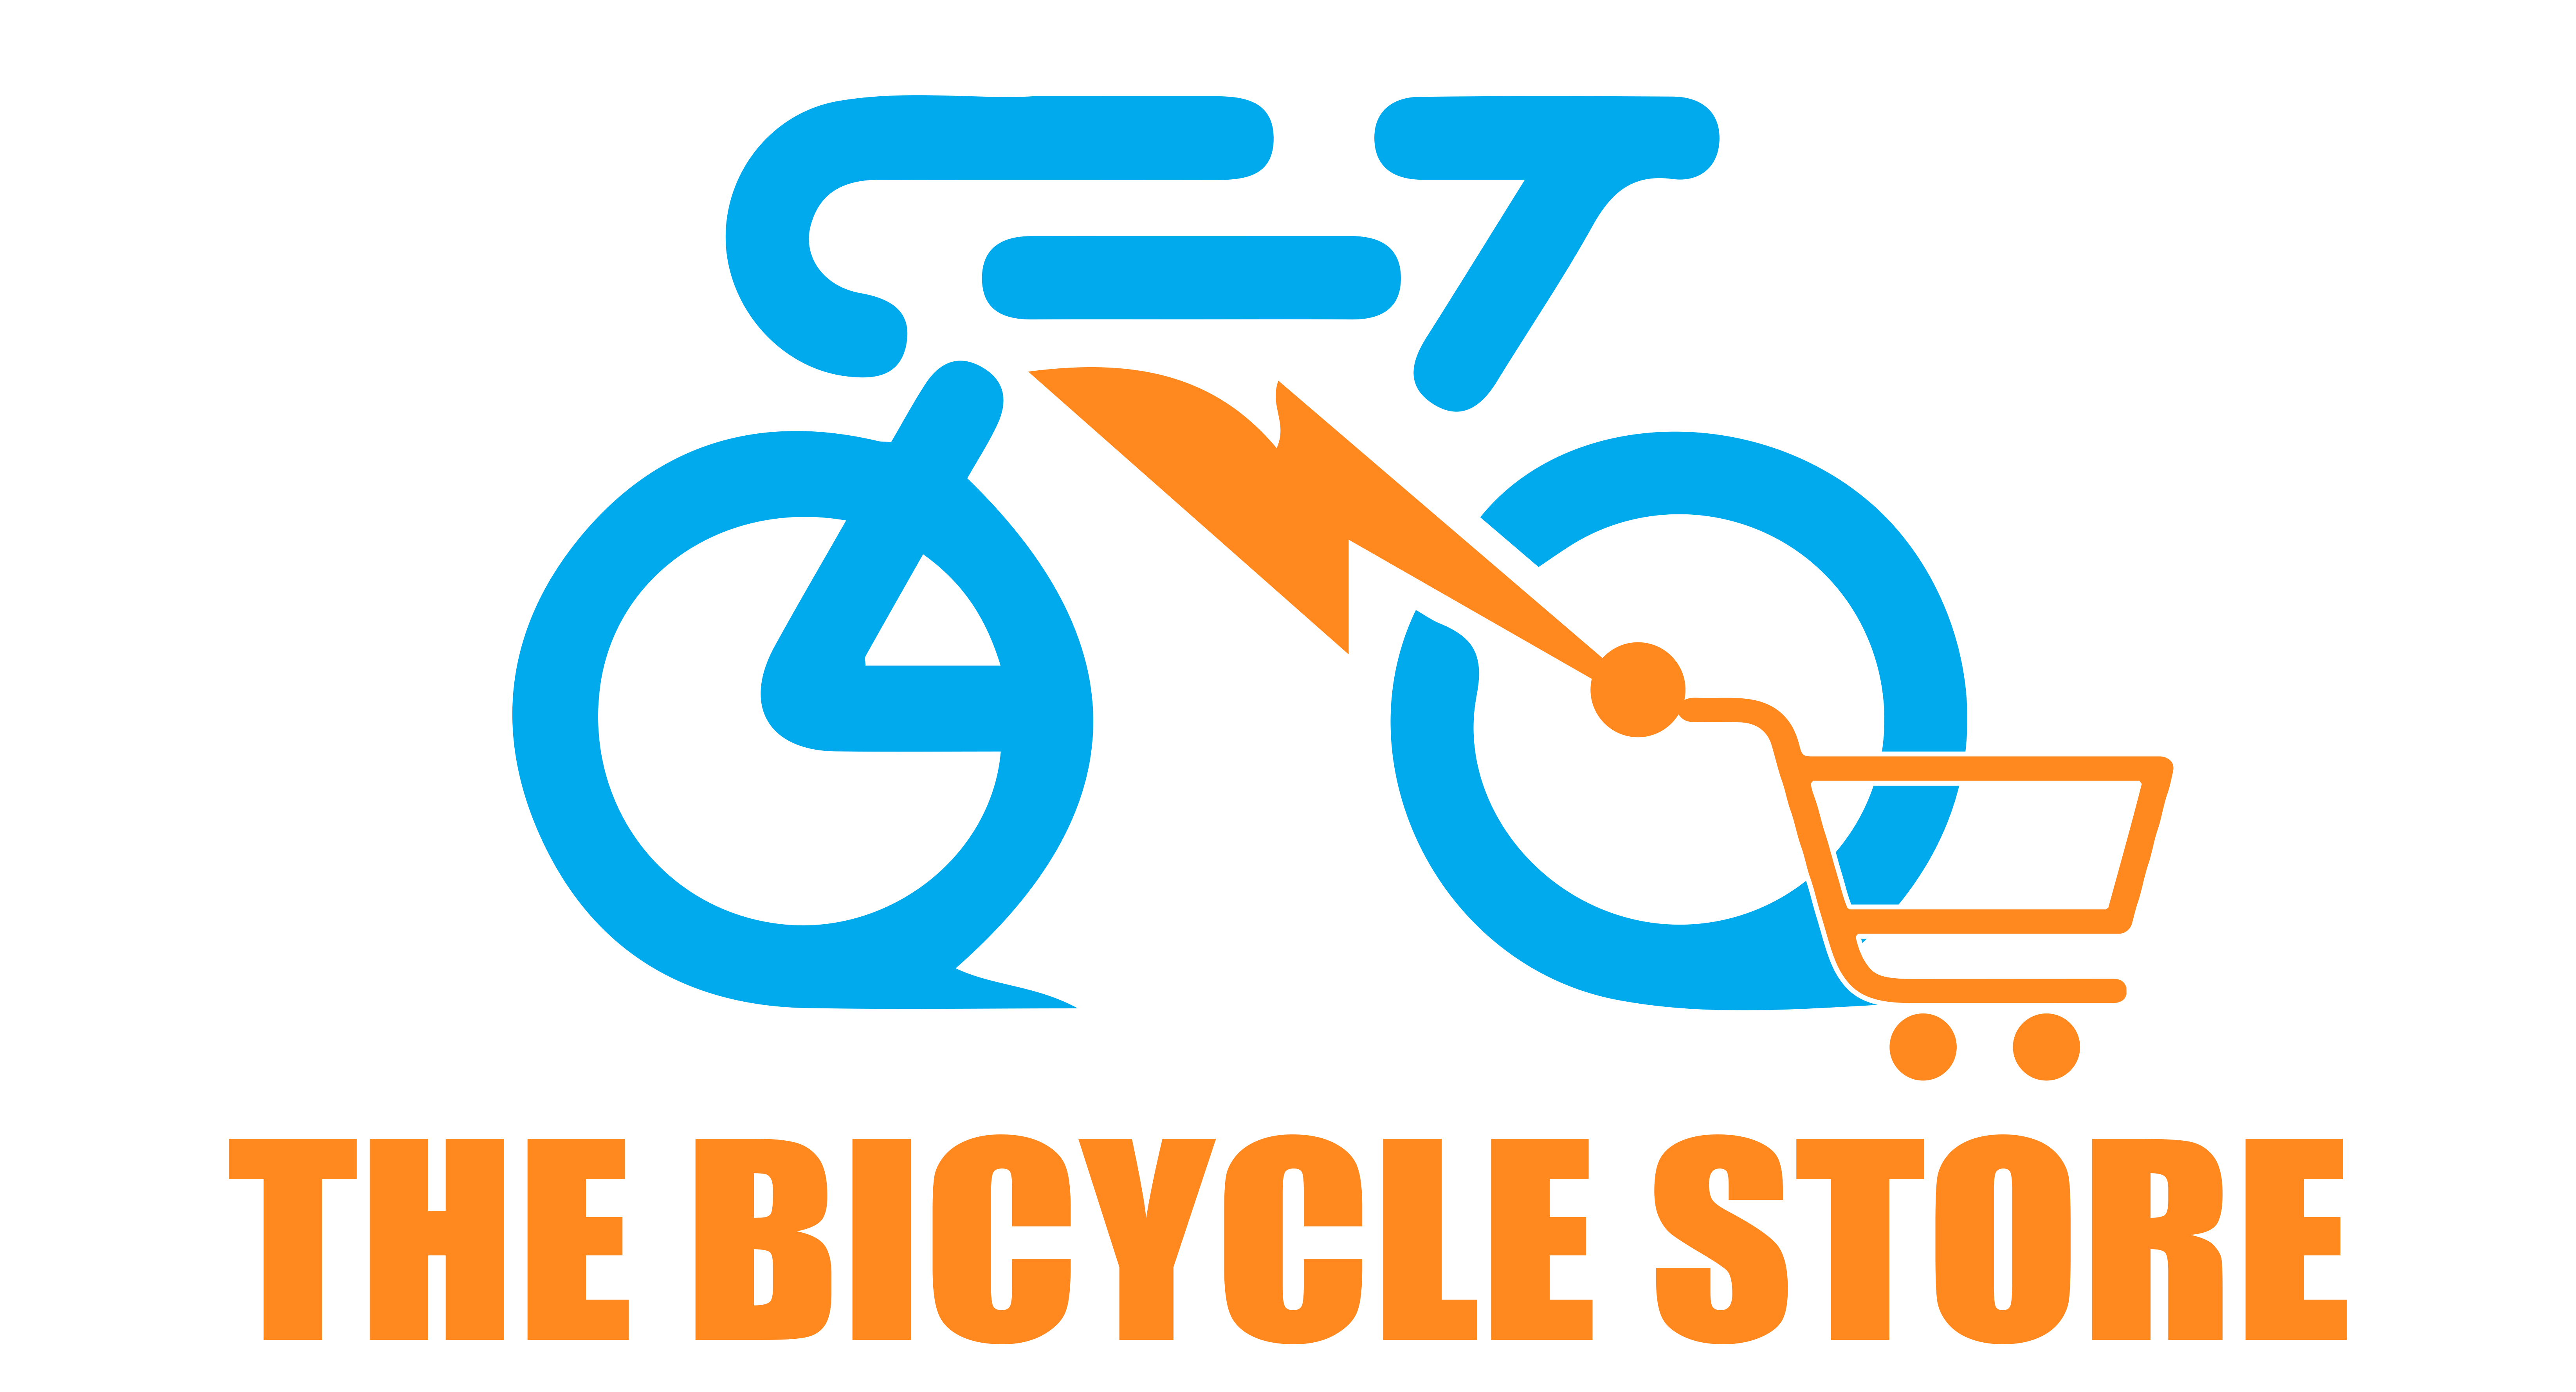 The Bicycle Store